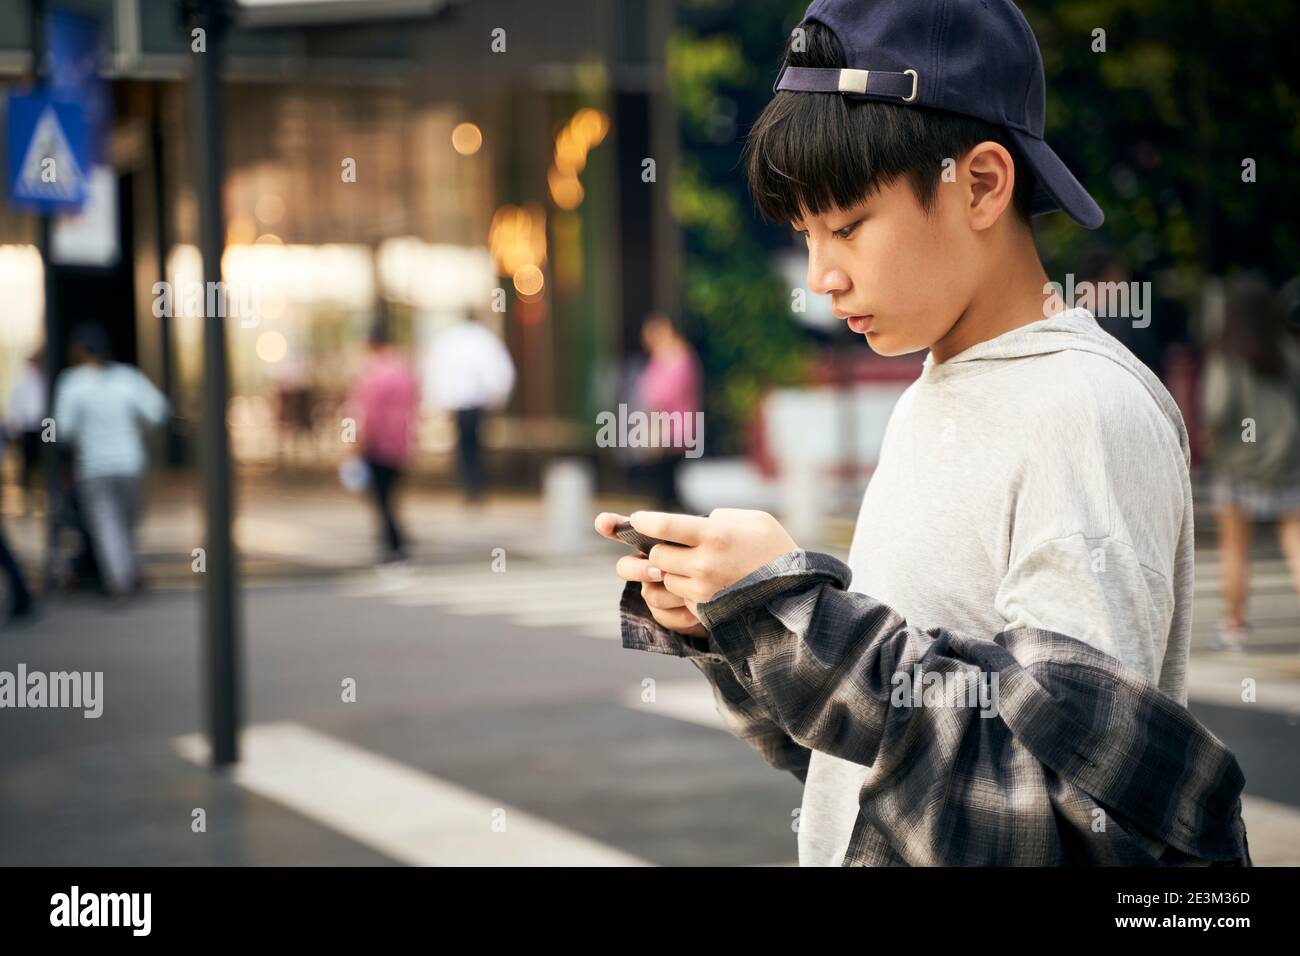 teenage asian child looking at cellphone while walking on street Stock Photo